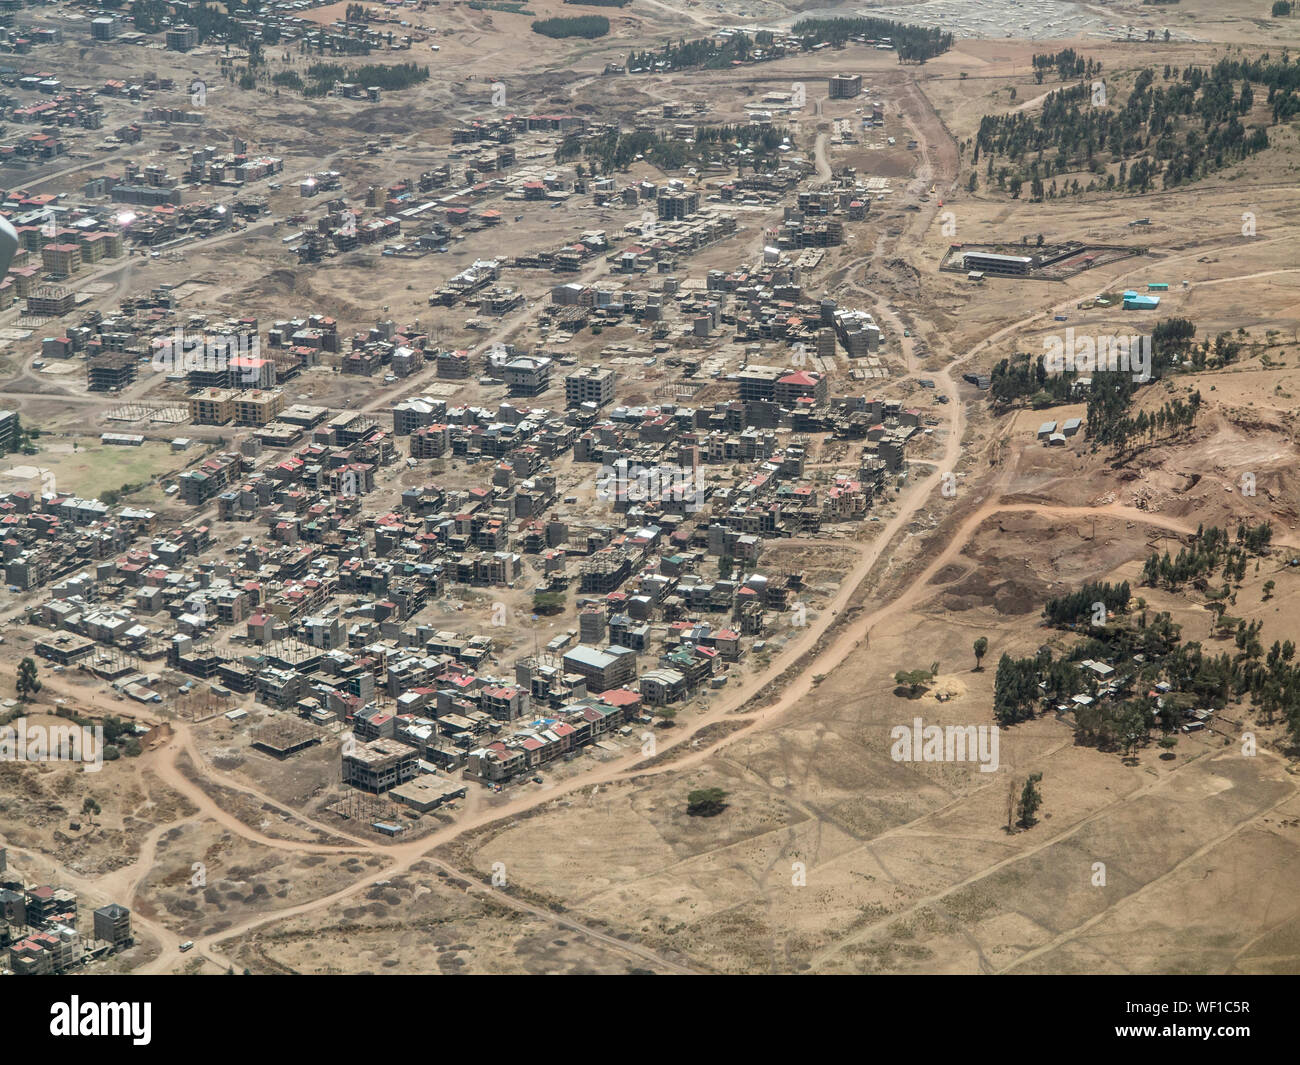 aerial view of low cost urban housing in Africa Stock Photo